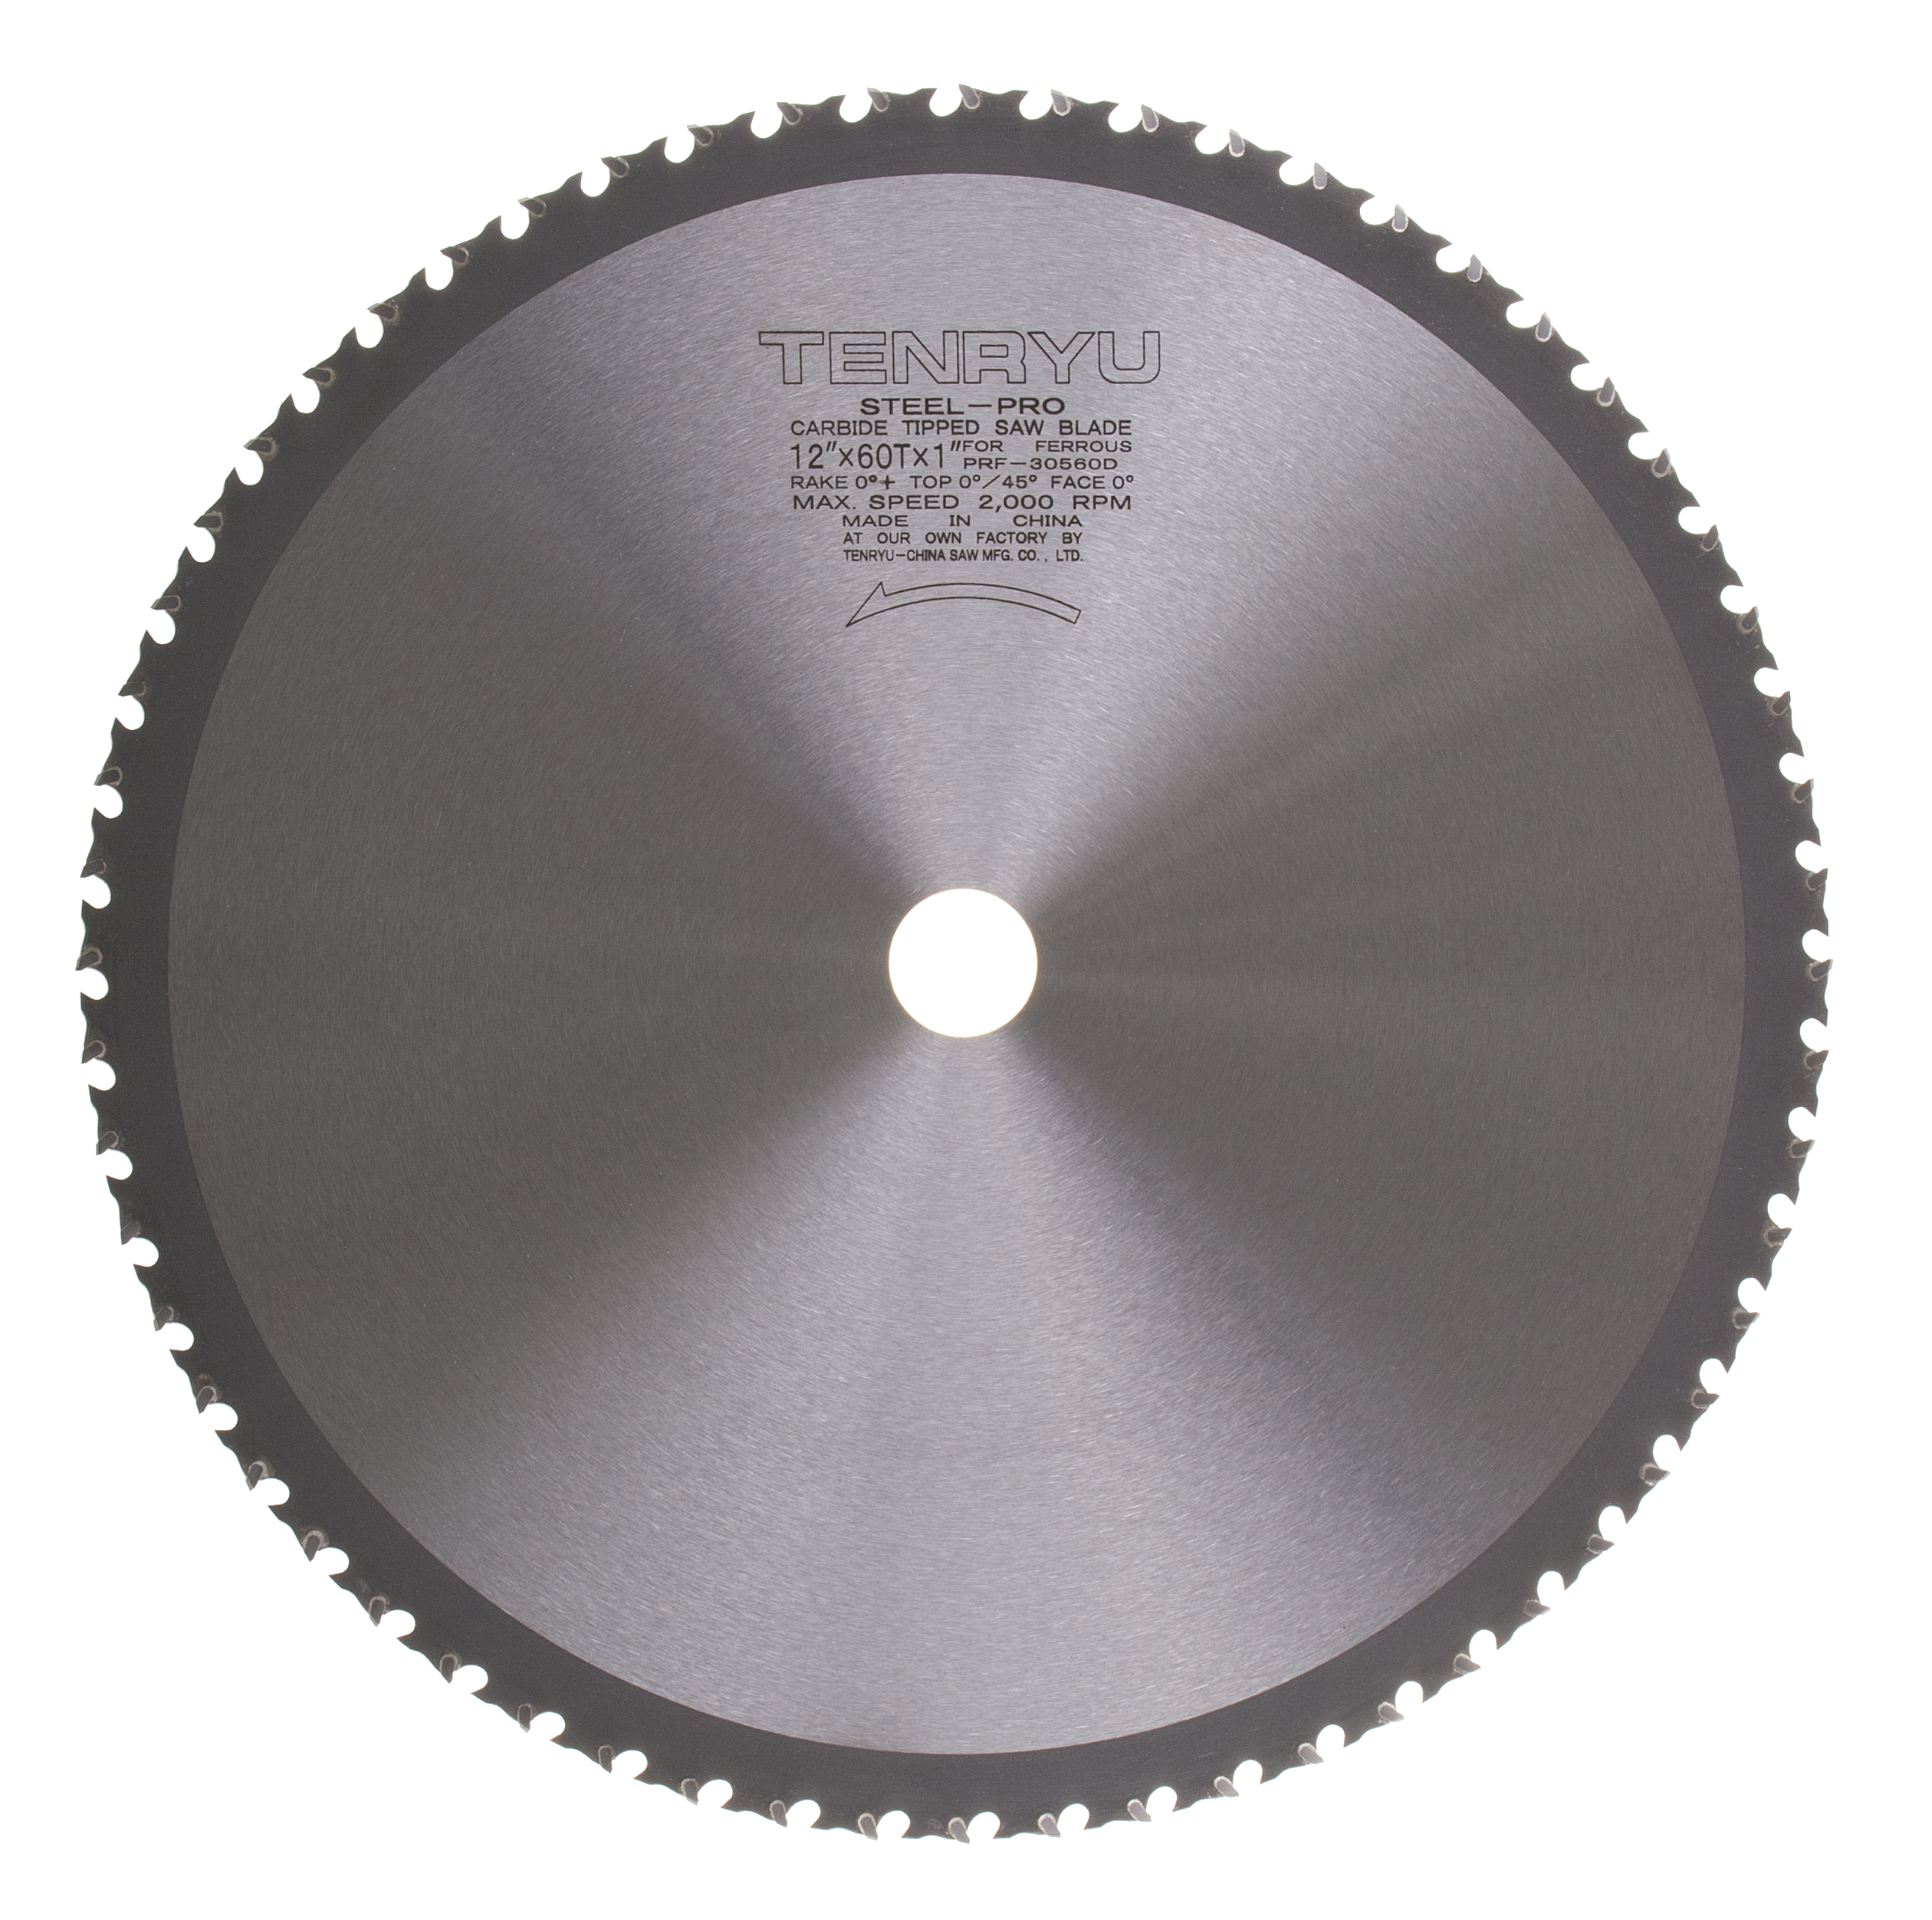 Tenryu PRF-30560D 12" Carbide Tipped Saw Blade ( 60 Tooth TCG Grind - 1